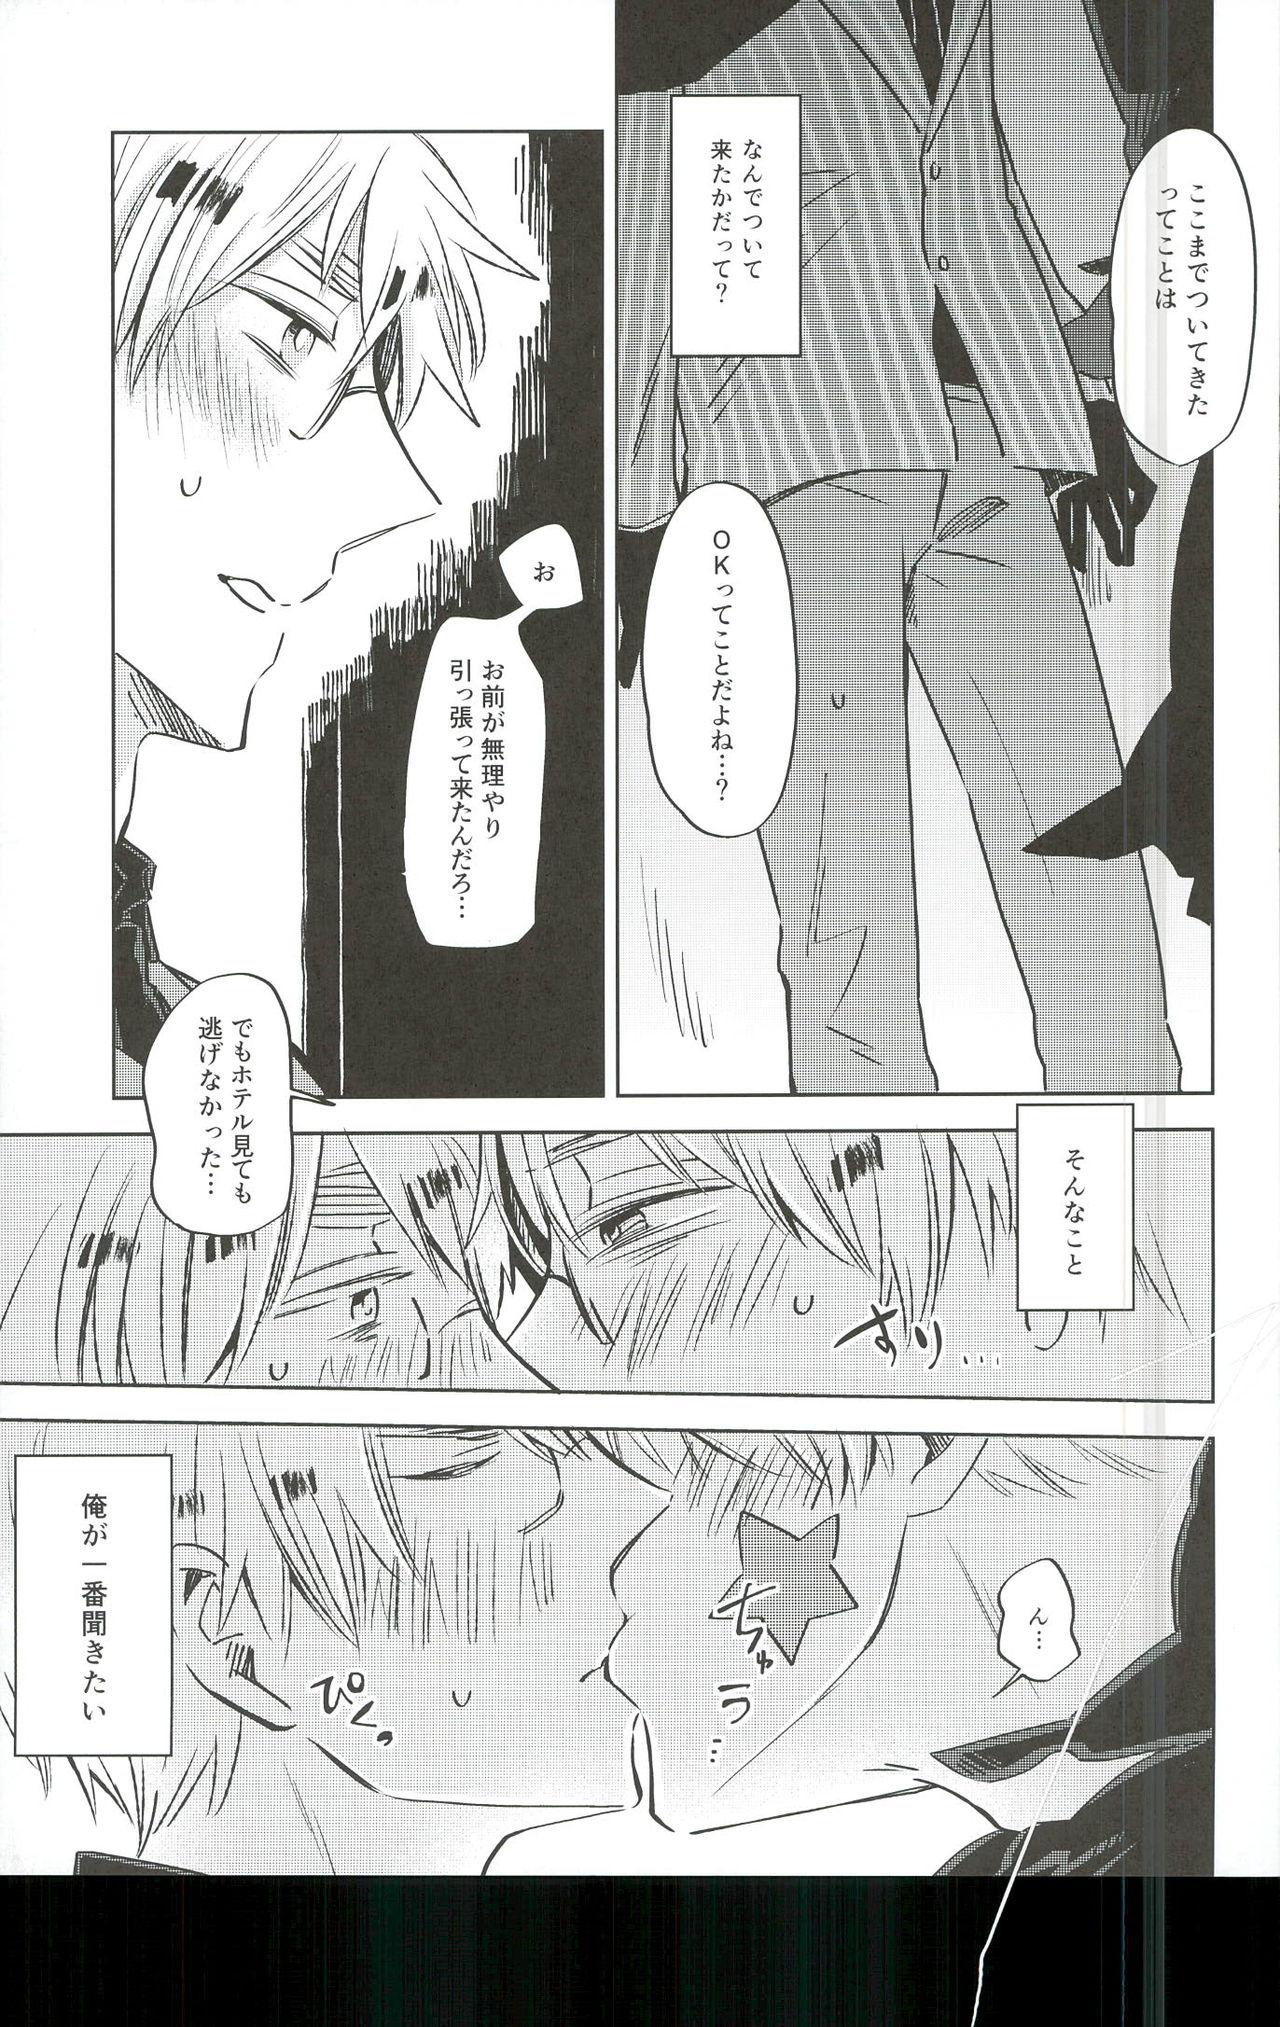 Black Ameagari no Slip Out - Axis powers hetalia Pussylicking - Page 4